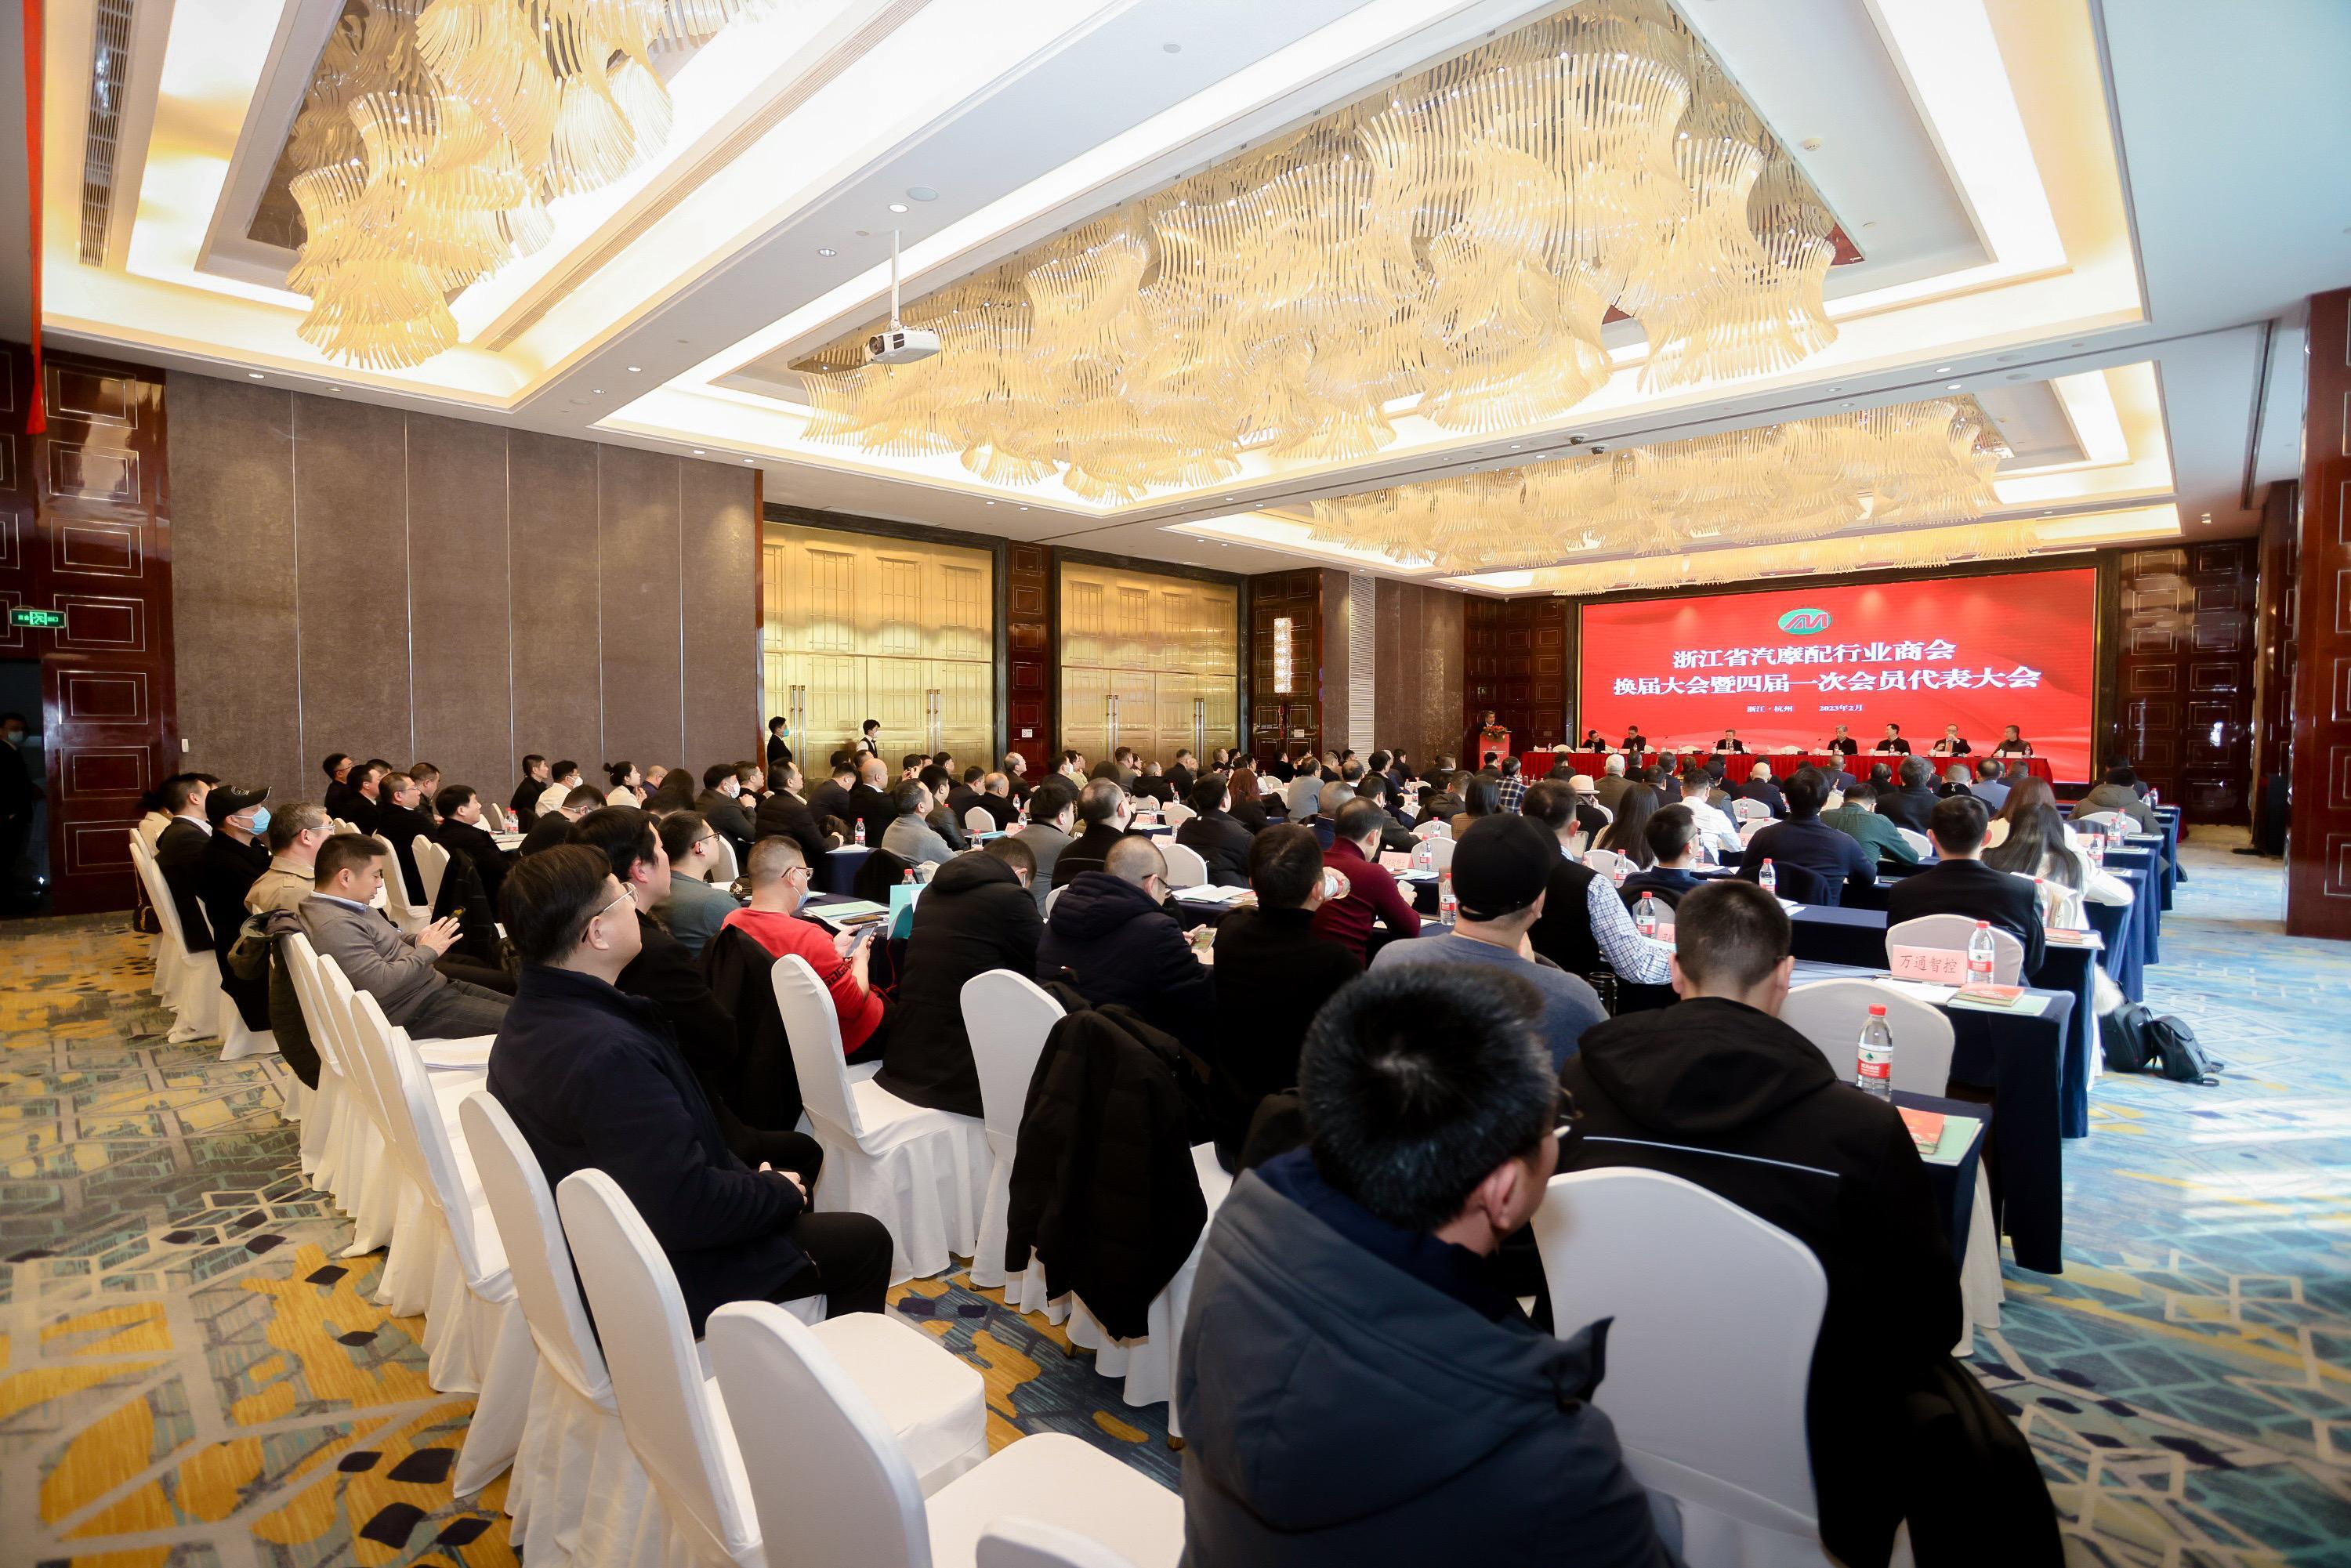 FAP Tech Joined the Zhejiang Automobile and Motorcycle Parts Chamber of Commerce